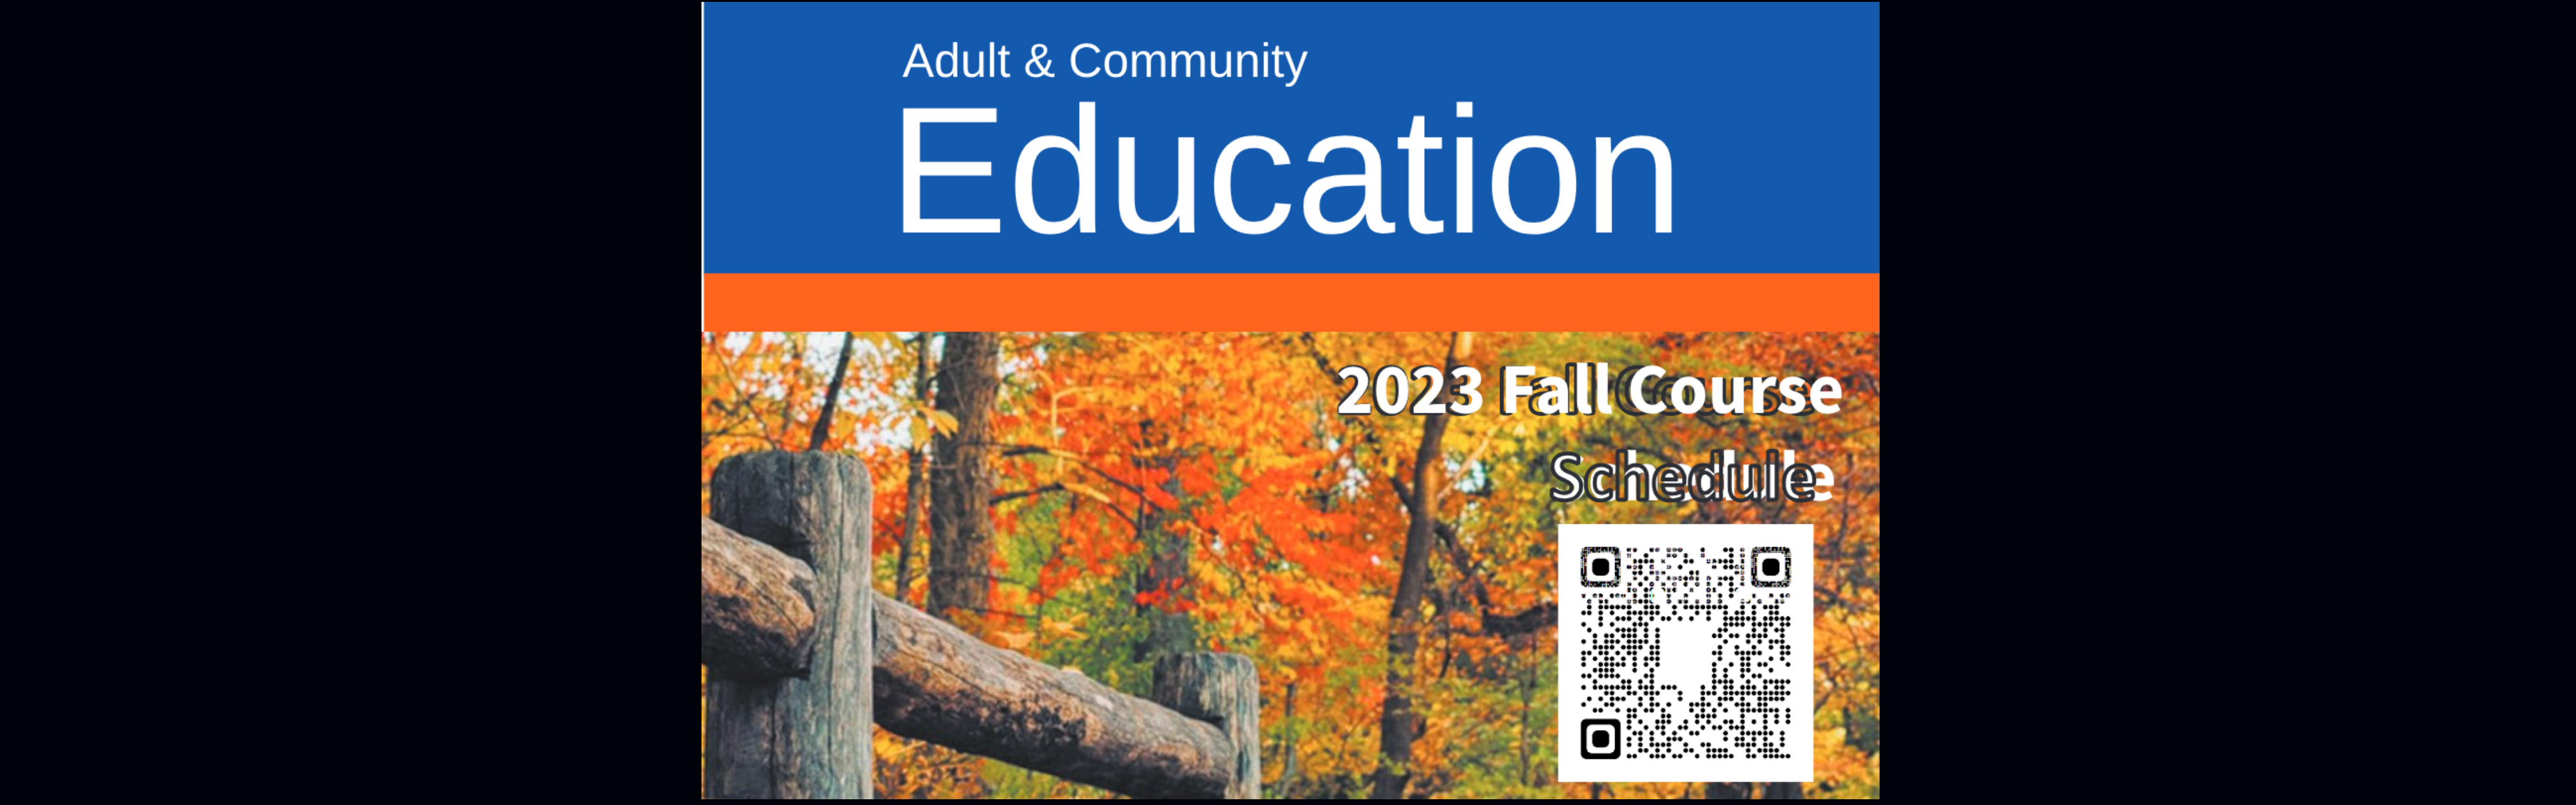 Adult & Community Education Cover